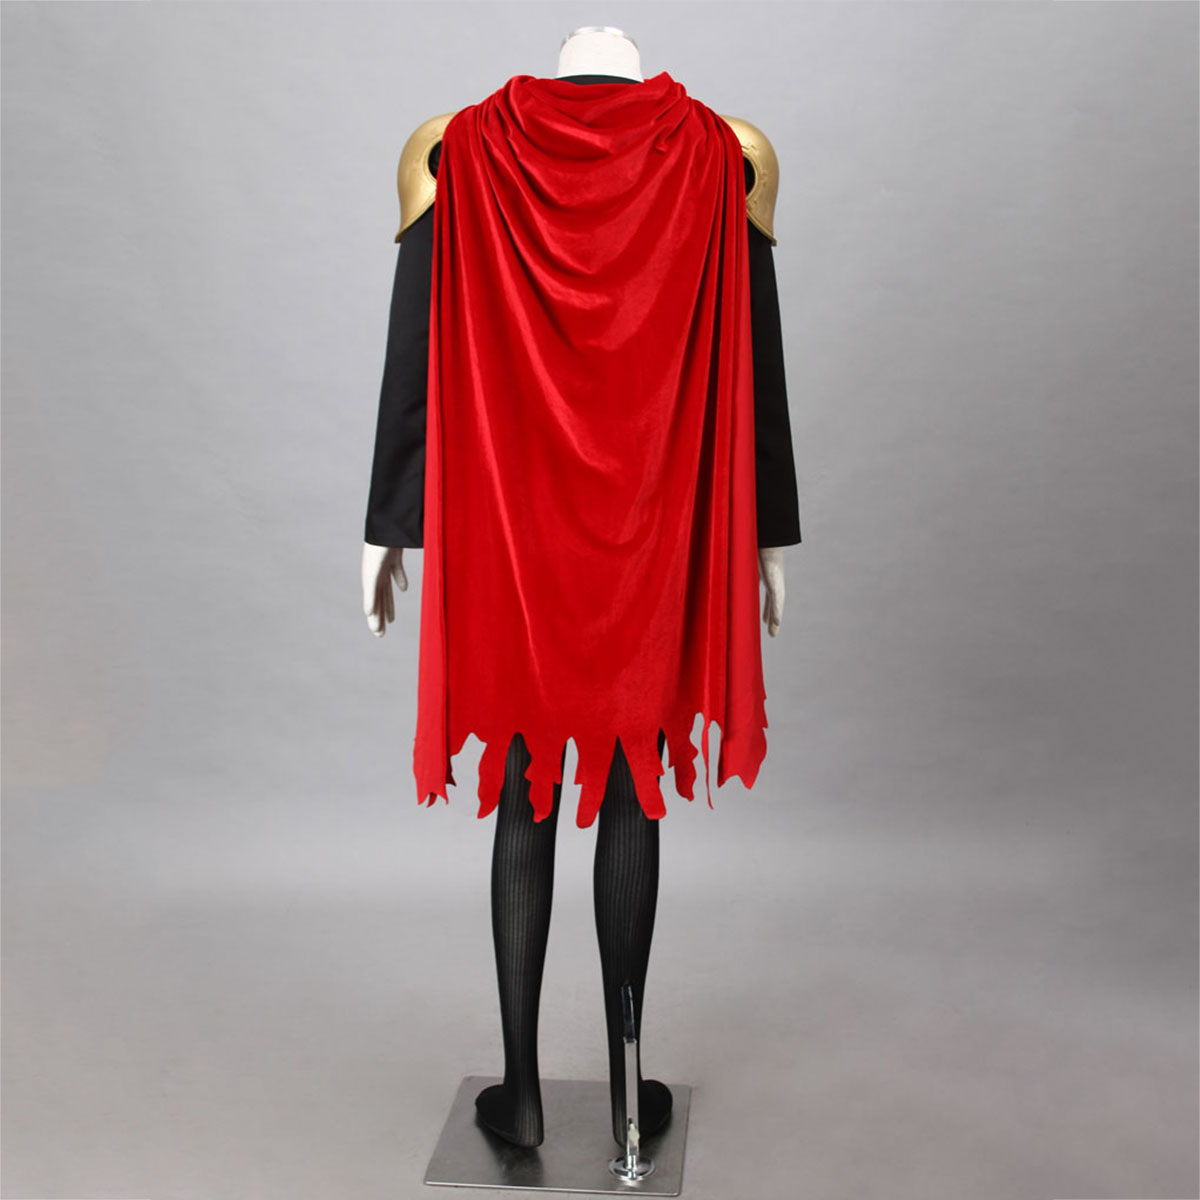 Final Fantasy Type-0 Sice 1 Cosplay Costumes AU